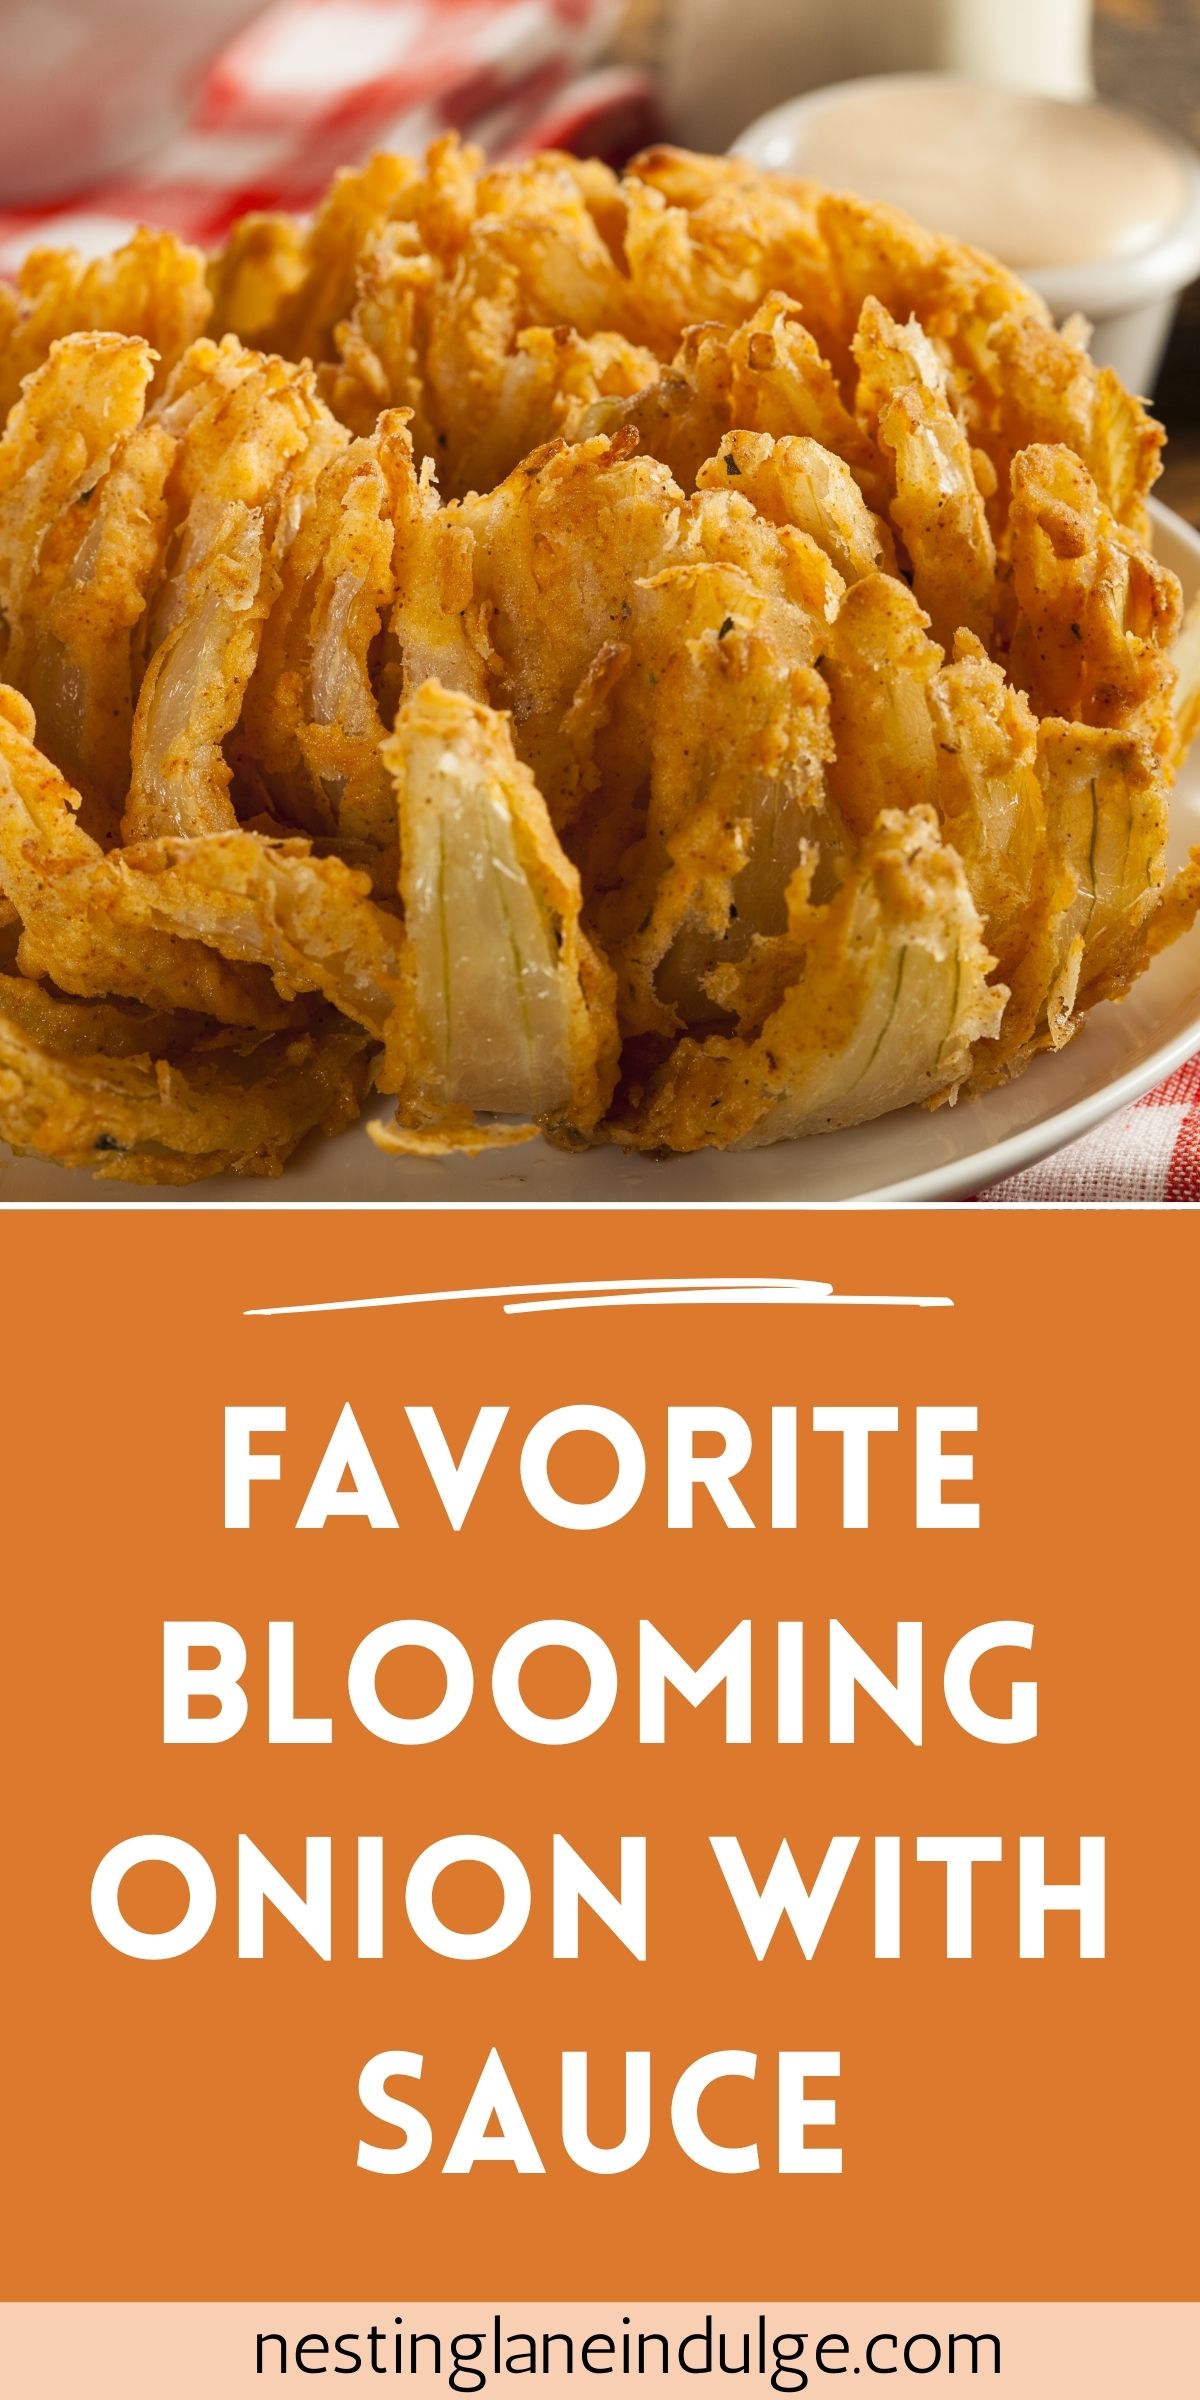 Graphic for Pinterest of Favorite Blooming Onion with Sauce Recipe.